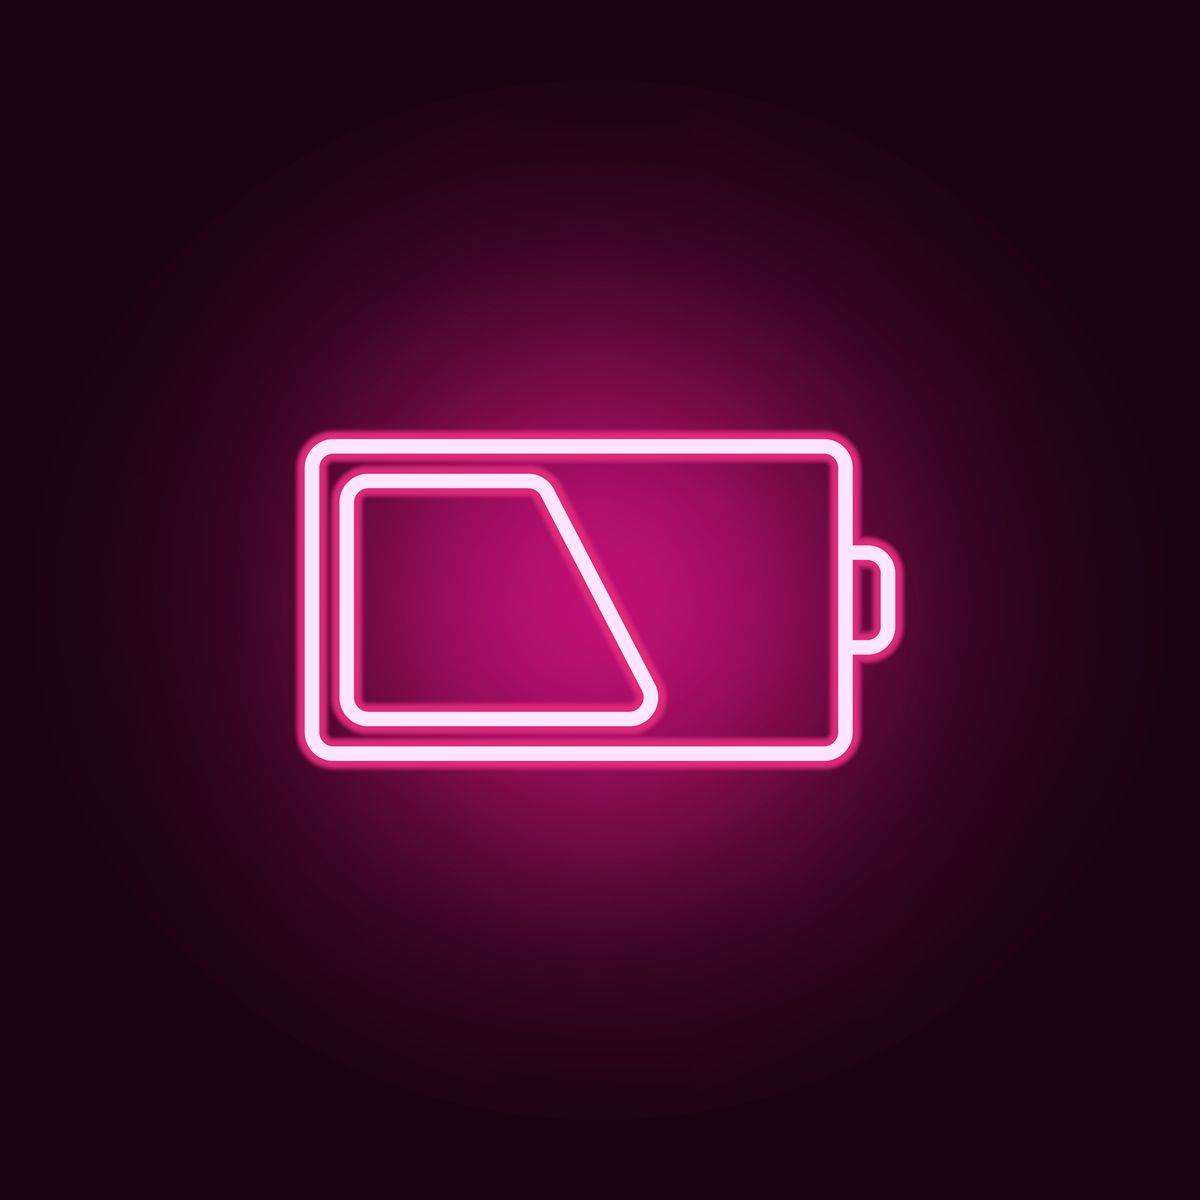 sign half charge icon elements of web in neon style icons simple icon for websites, web design, mobile app, info graphics